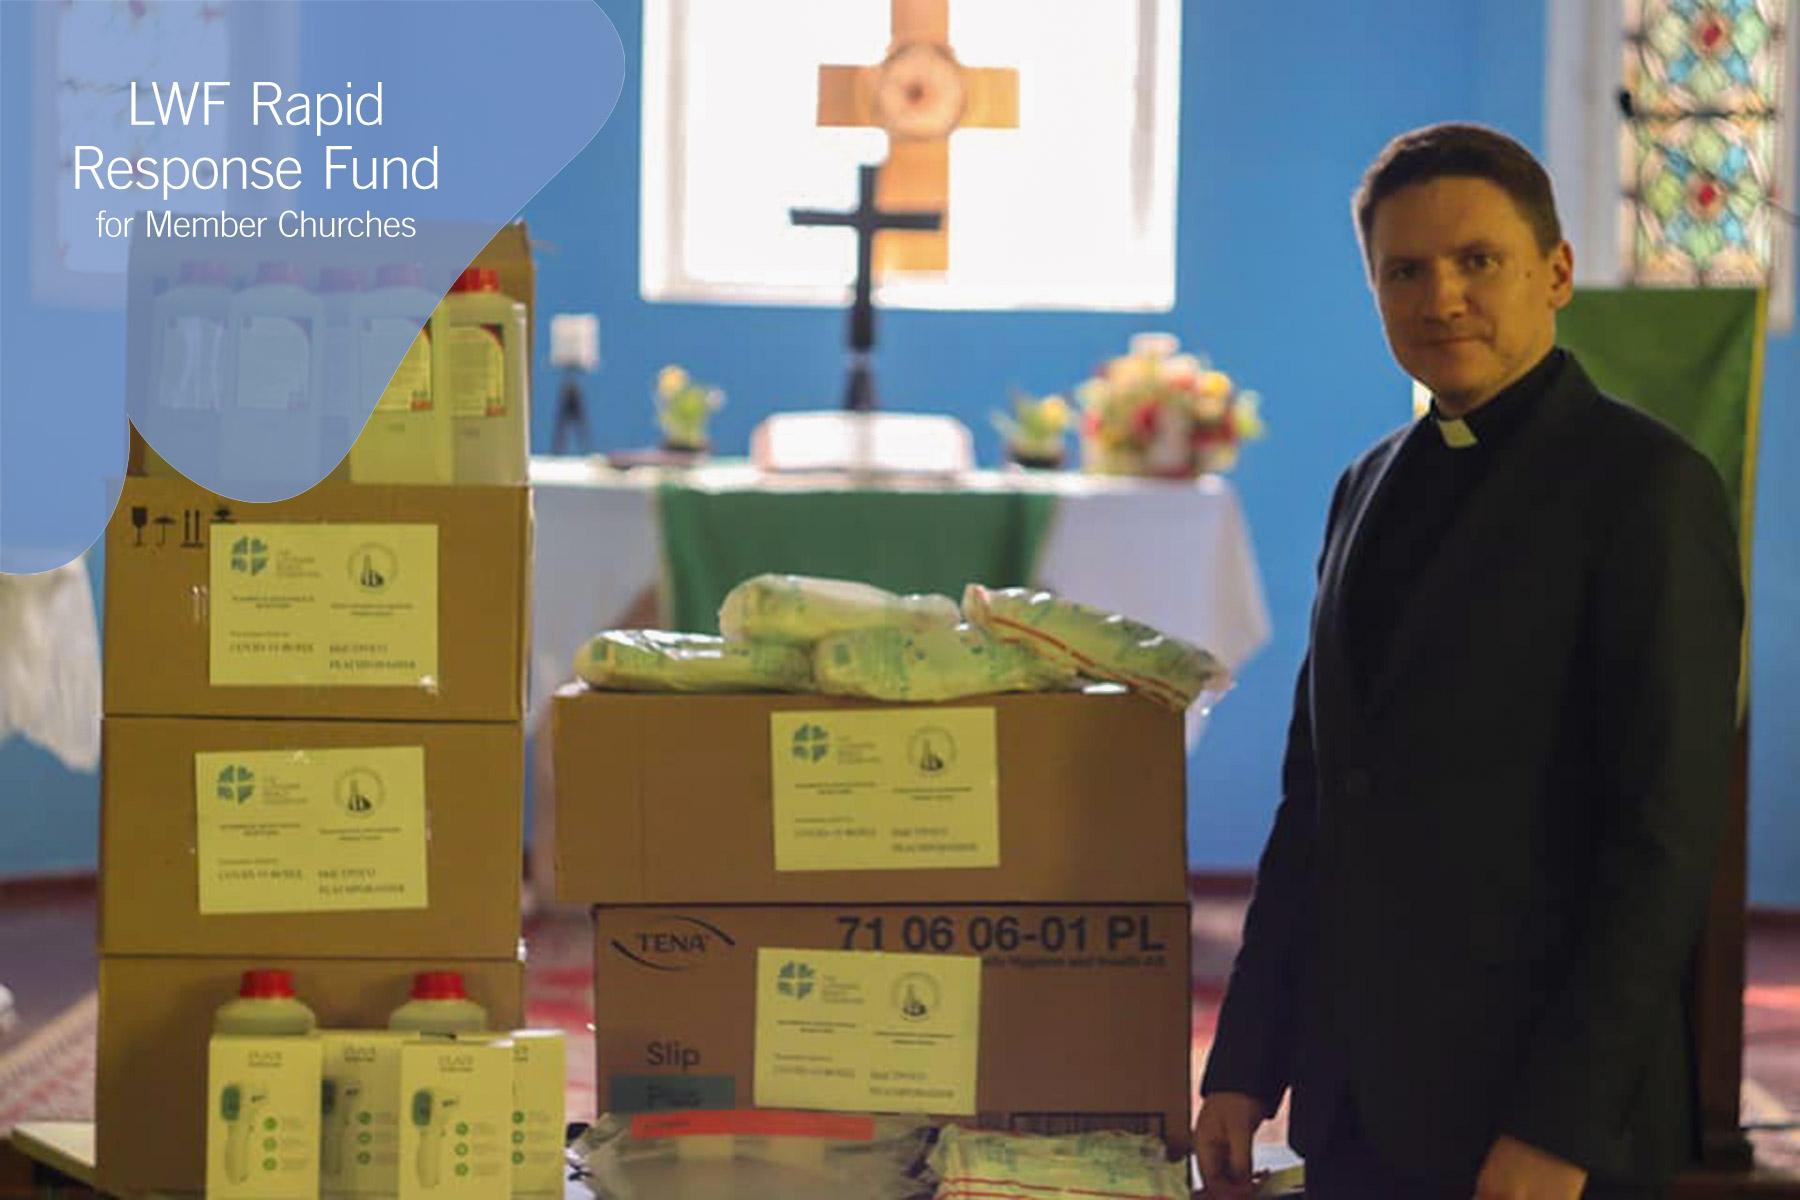 The Lutheran Church in Grodno, Belarus, Rev. Vladimir Tatarnikov stands with supplies purchased with LWF COVID-19 Rapid Response Funds. Photo: The Lutheran Church in Grodno